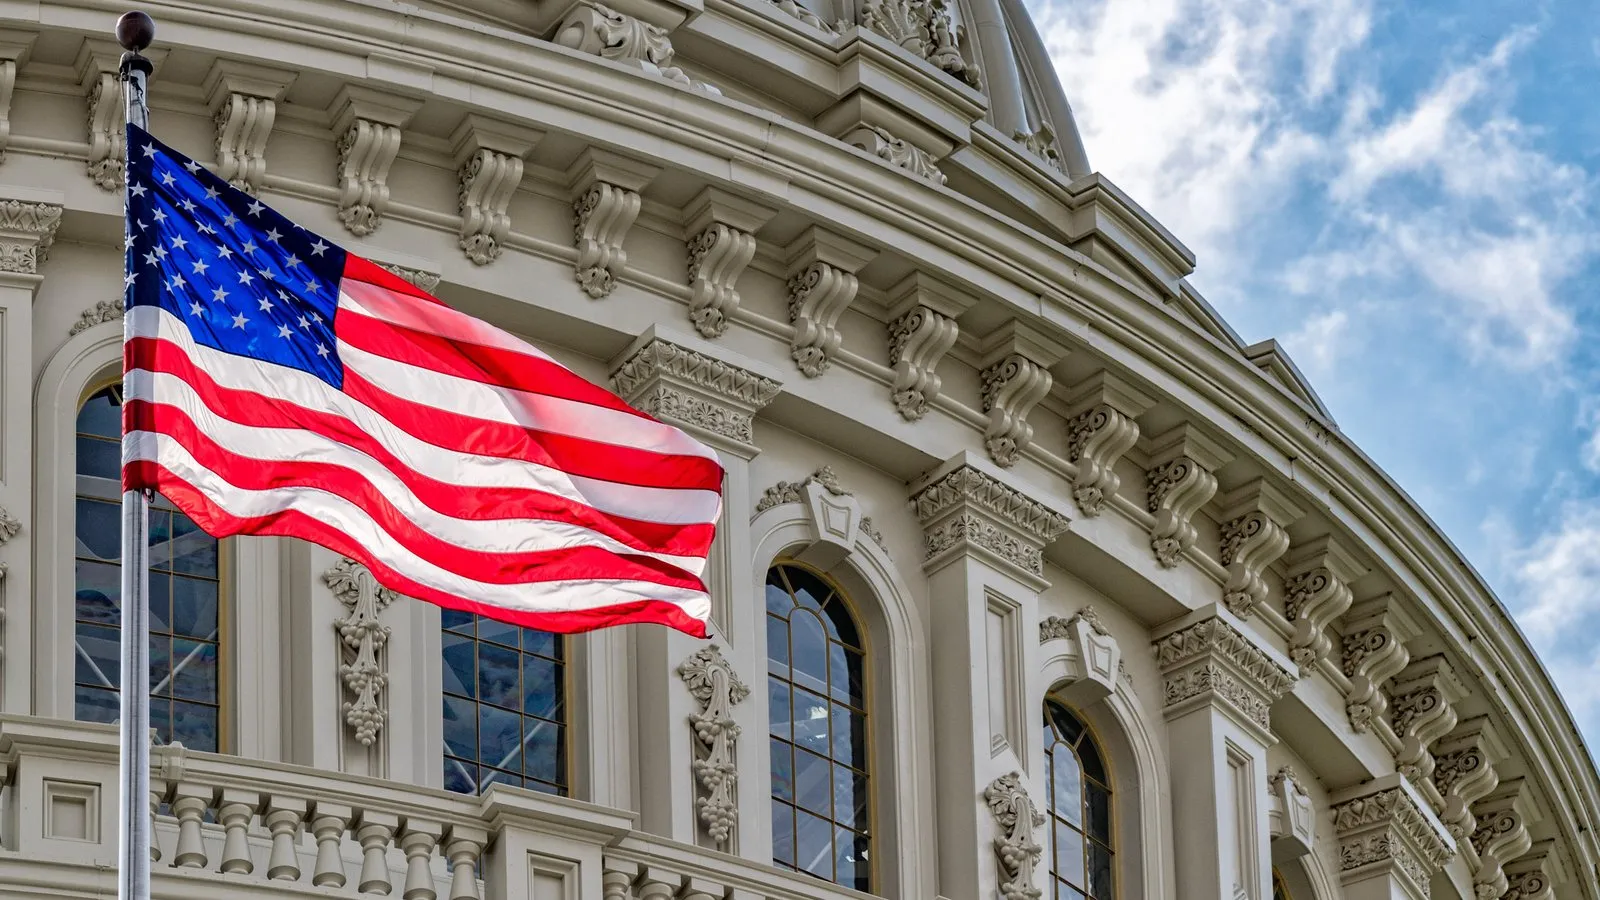 U.S. Capitol and Flag. Source: Shutterstock